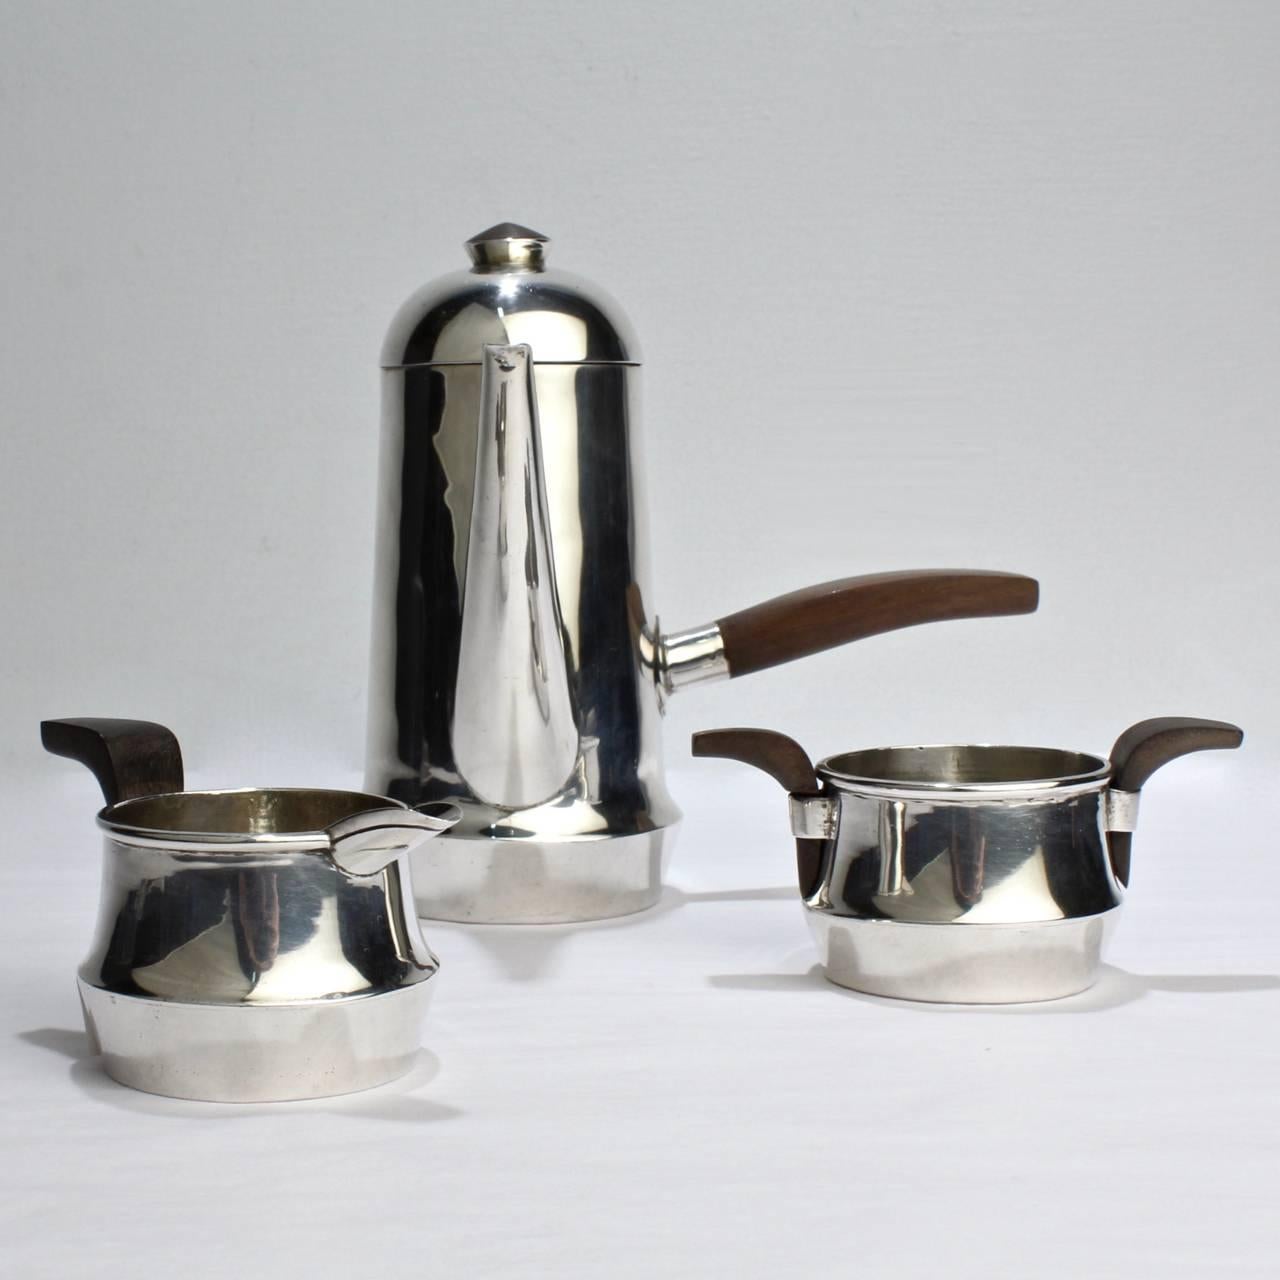 A fine and rare hand-wrought William Spratling sterling silver espresso or demi-coffee set.

Comprising of a side-handled coffee pot, creamer and sugar. Each with rosewood handles.

Each piece has all the expected (and wished for) indices and